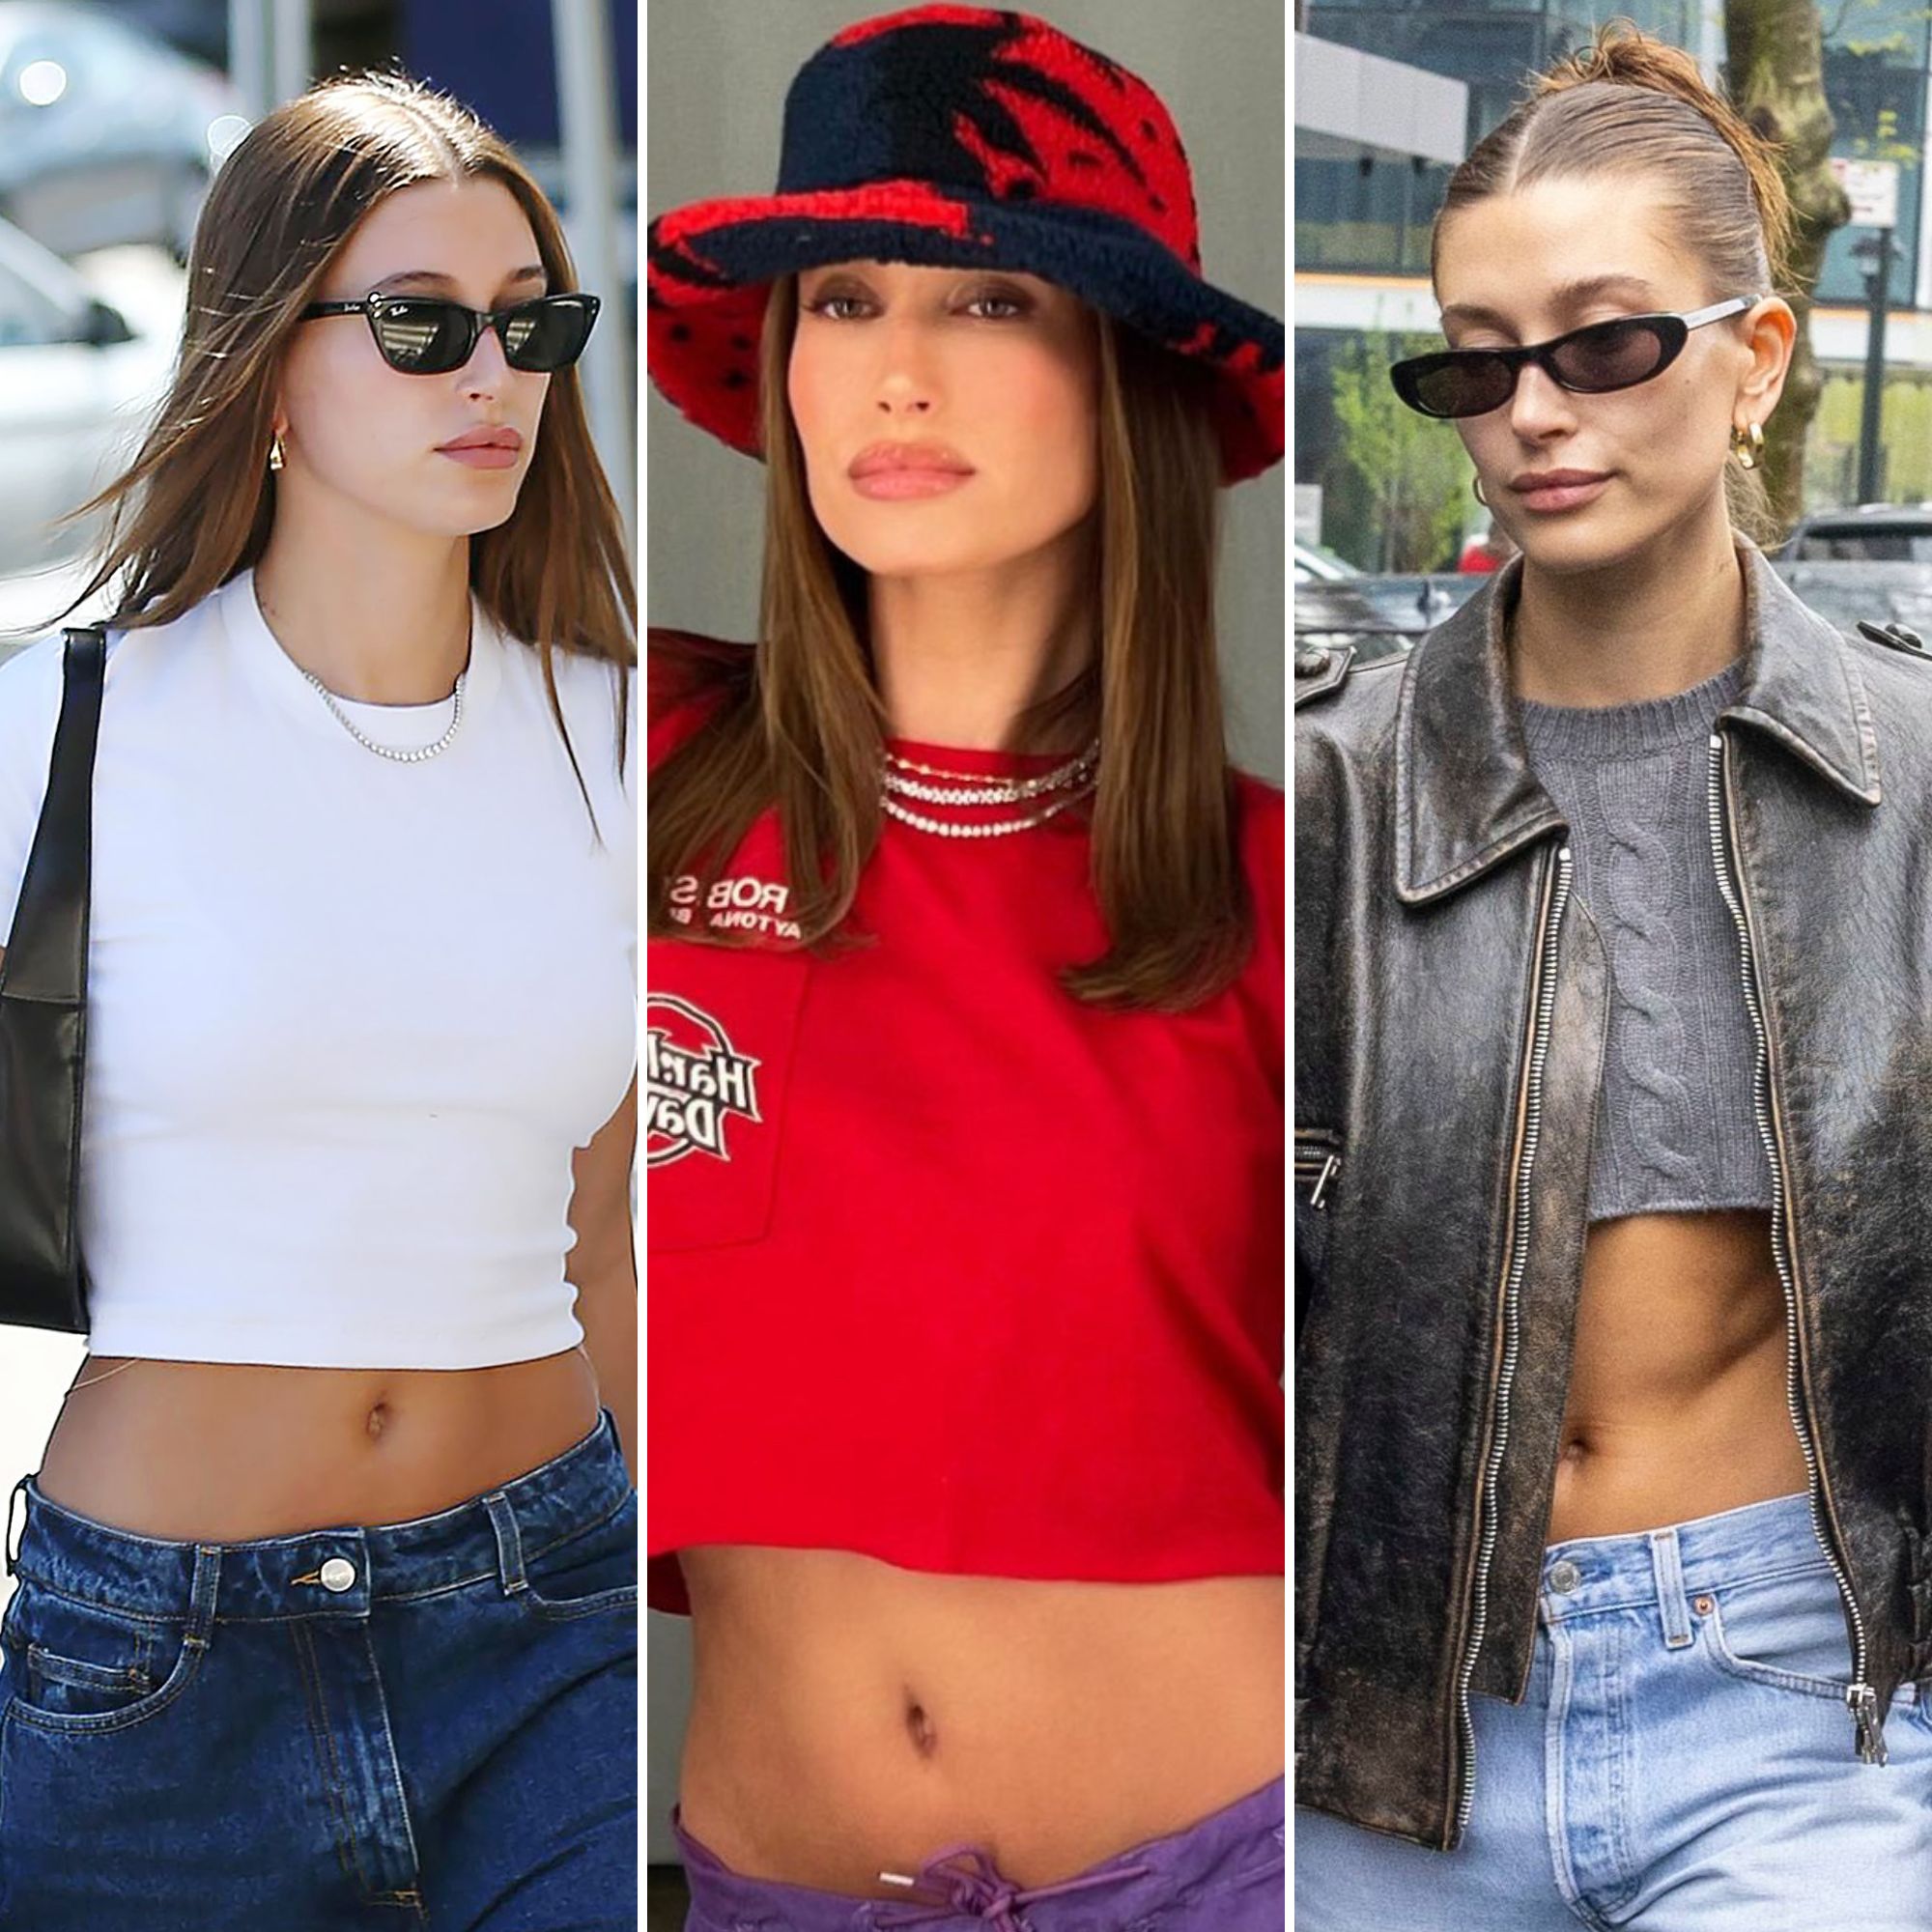 Hailey Bieber shows off bare stomach in crop top and low-rise